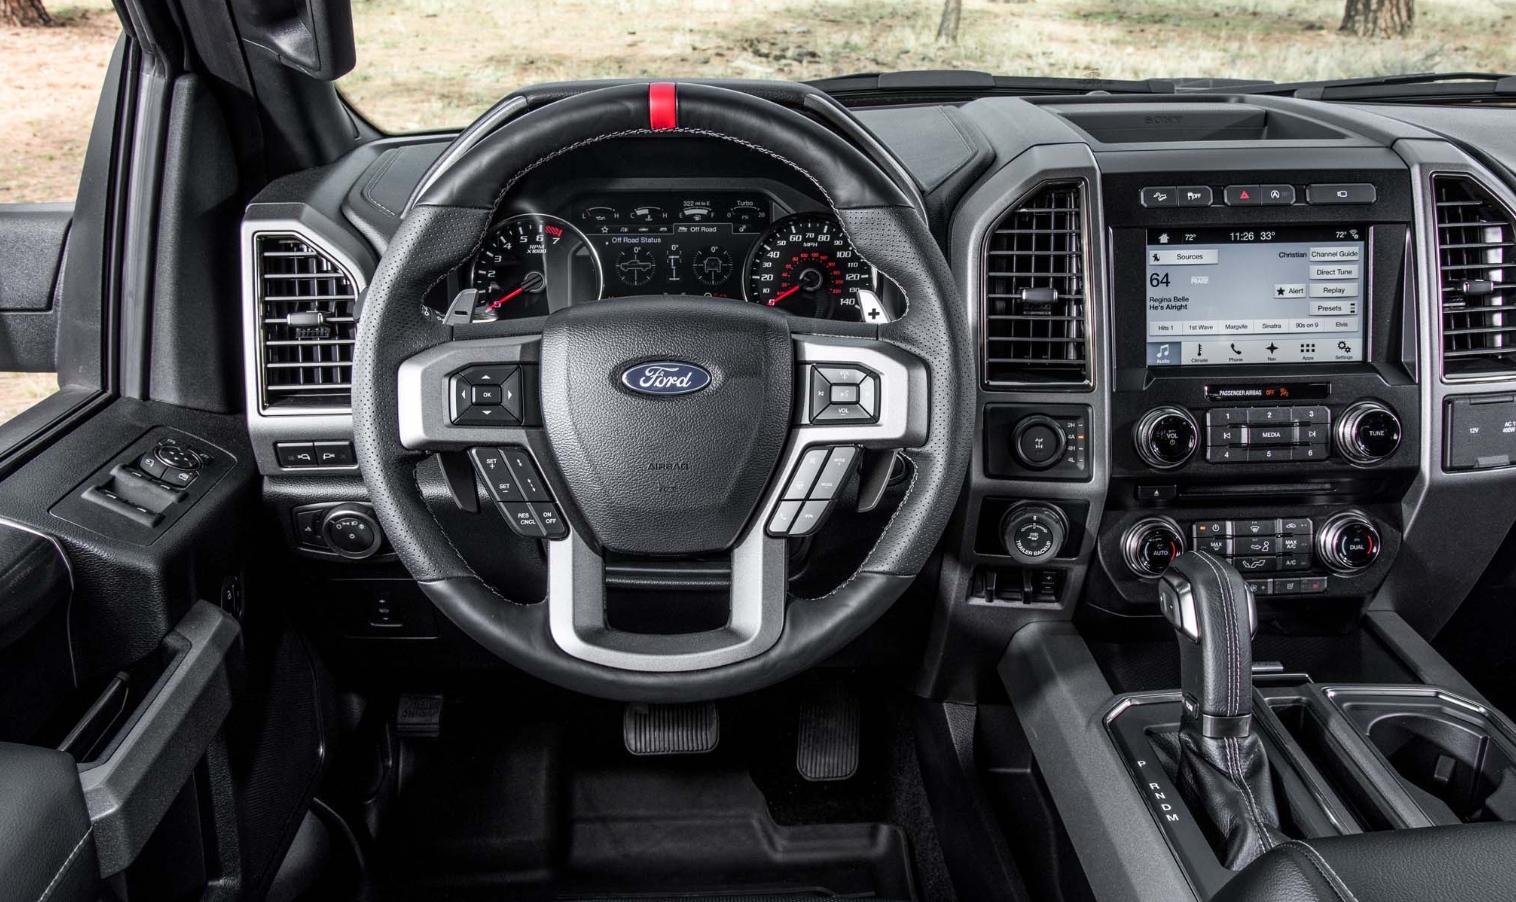 2025 Ford Super Duty Redesign Sets New Standards in Power and